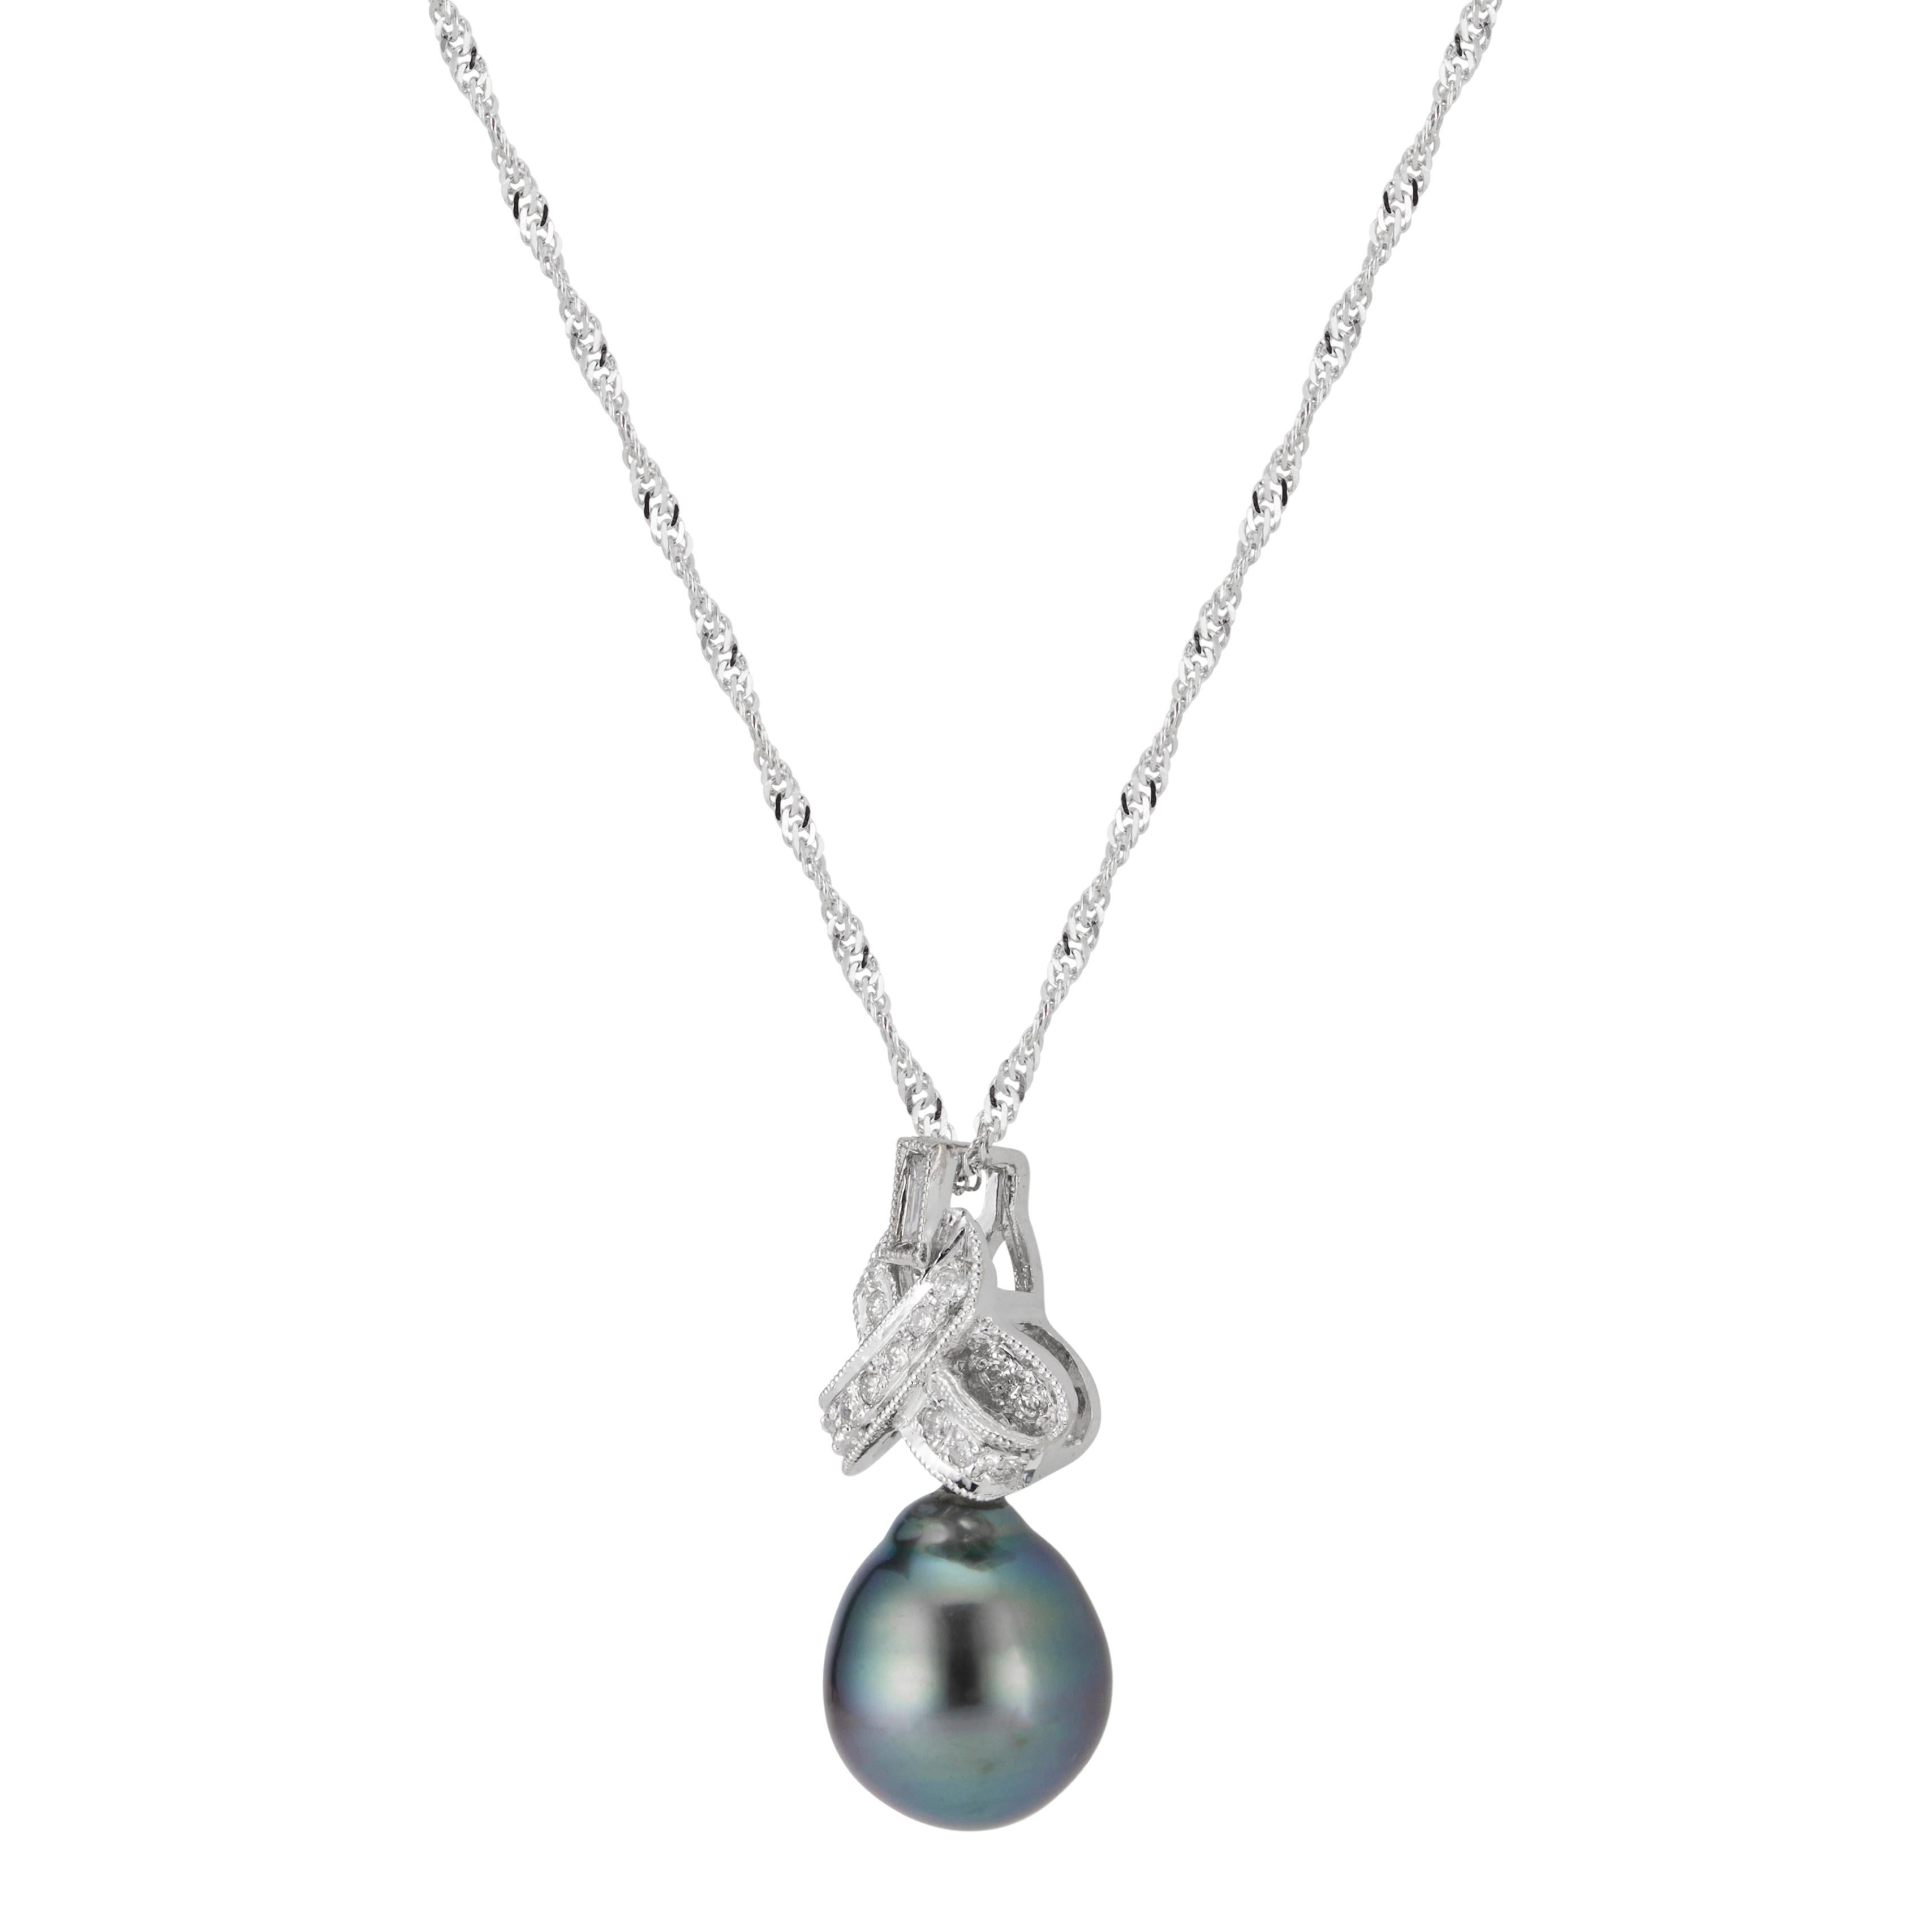 Black cultured south sea pearl and diamond necklace. Tear drop shaped black cultured South Sea pearl in a bow design 14 white gold pendant set with 16 round and 1 baguette diamond. 16 inches. 

1 grey/black South Sea pearl, 9.3mm- 10.8mm
16 round